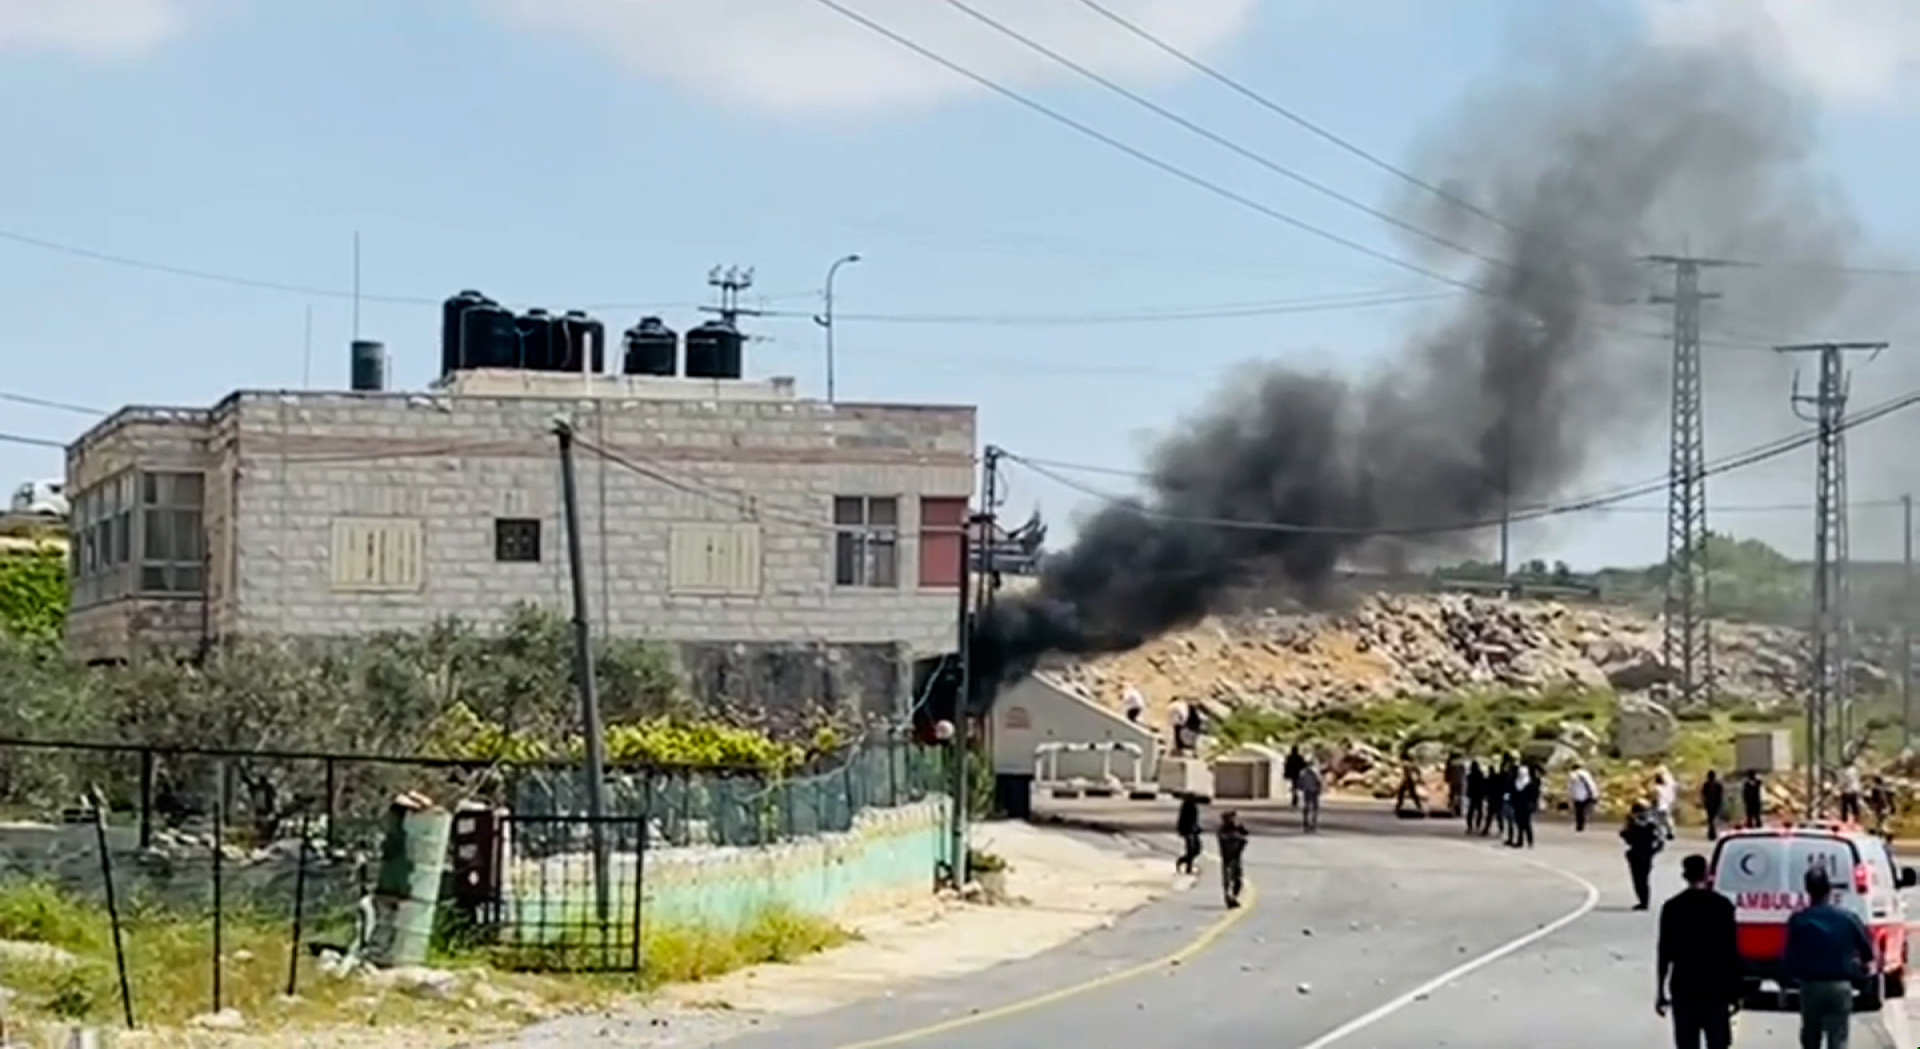 A screen grab from video obtained by CNN shows clashes between Israeli settlers and Palestinians in the village of Beitin in the West Bank on April 13.